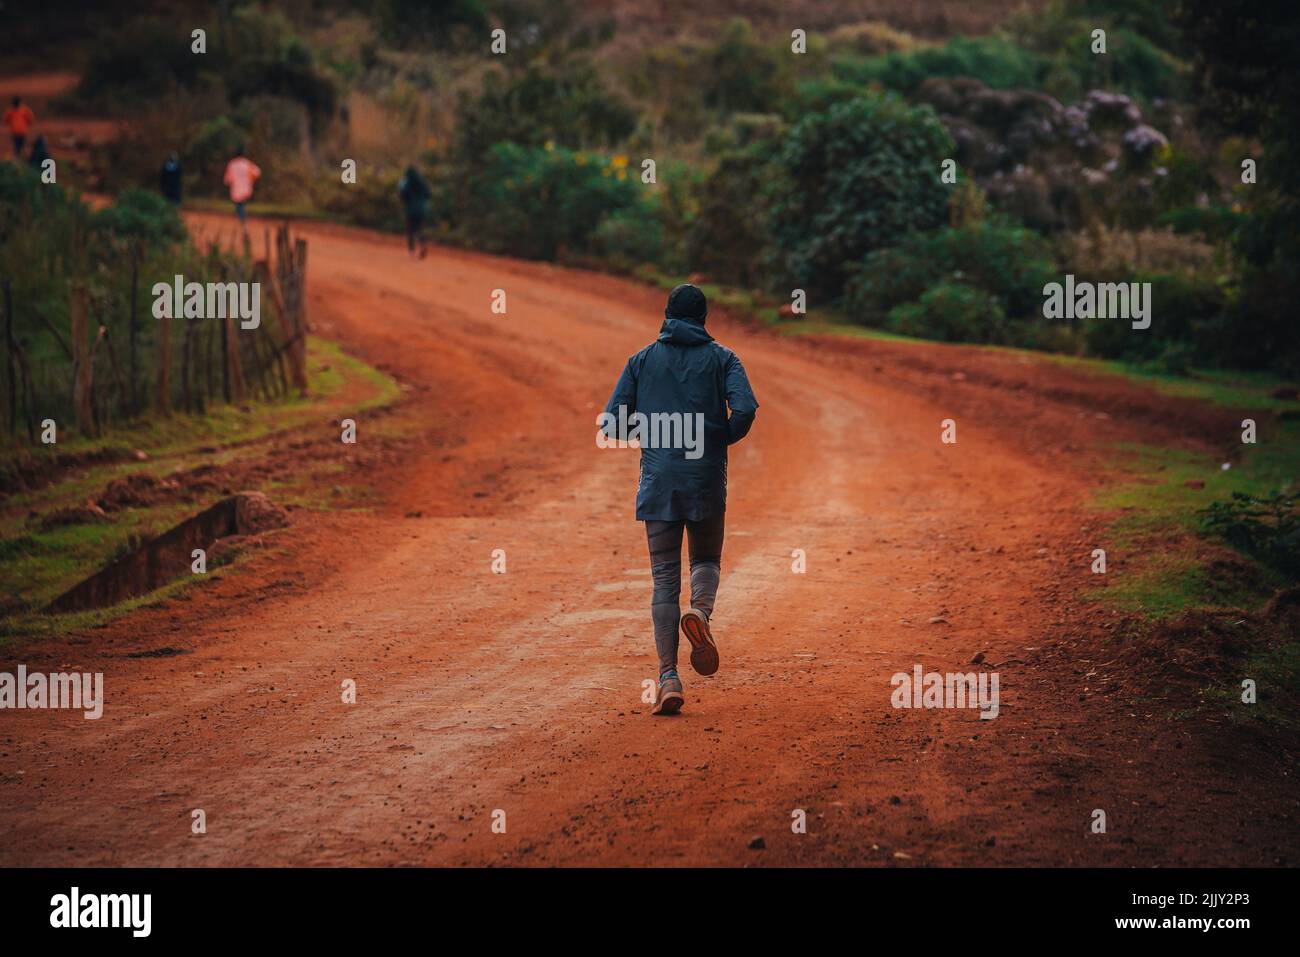 Morning run in Kenya. A woman trains on the road with red soils and prepares for a race. Training camp in the city of Iten in East Africa Stock Photo